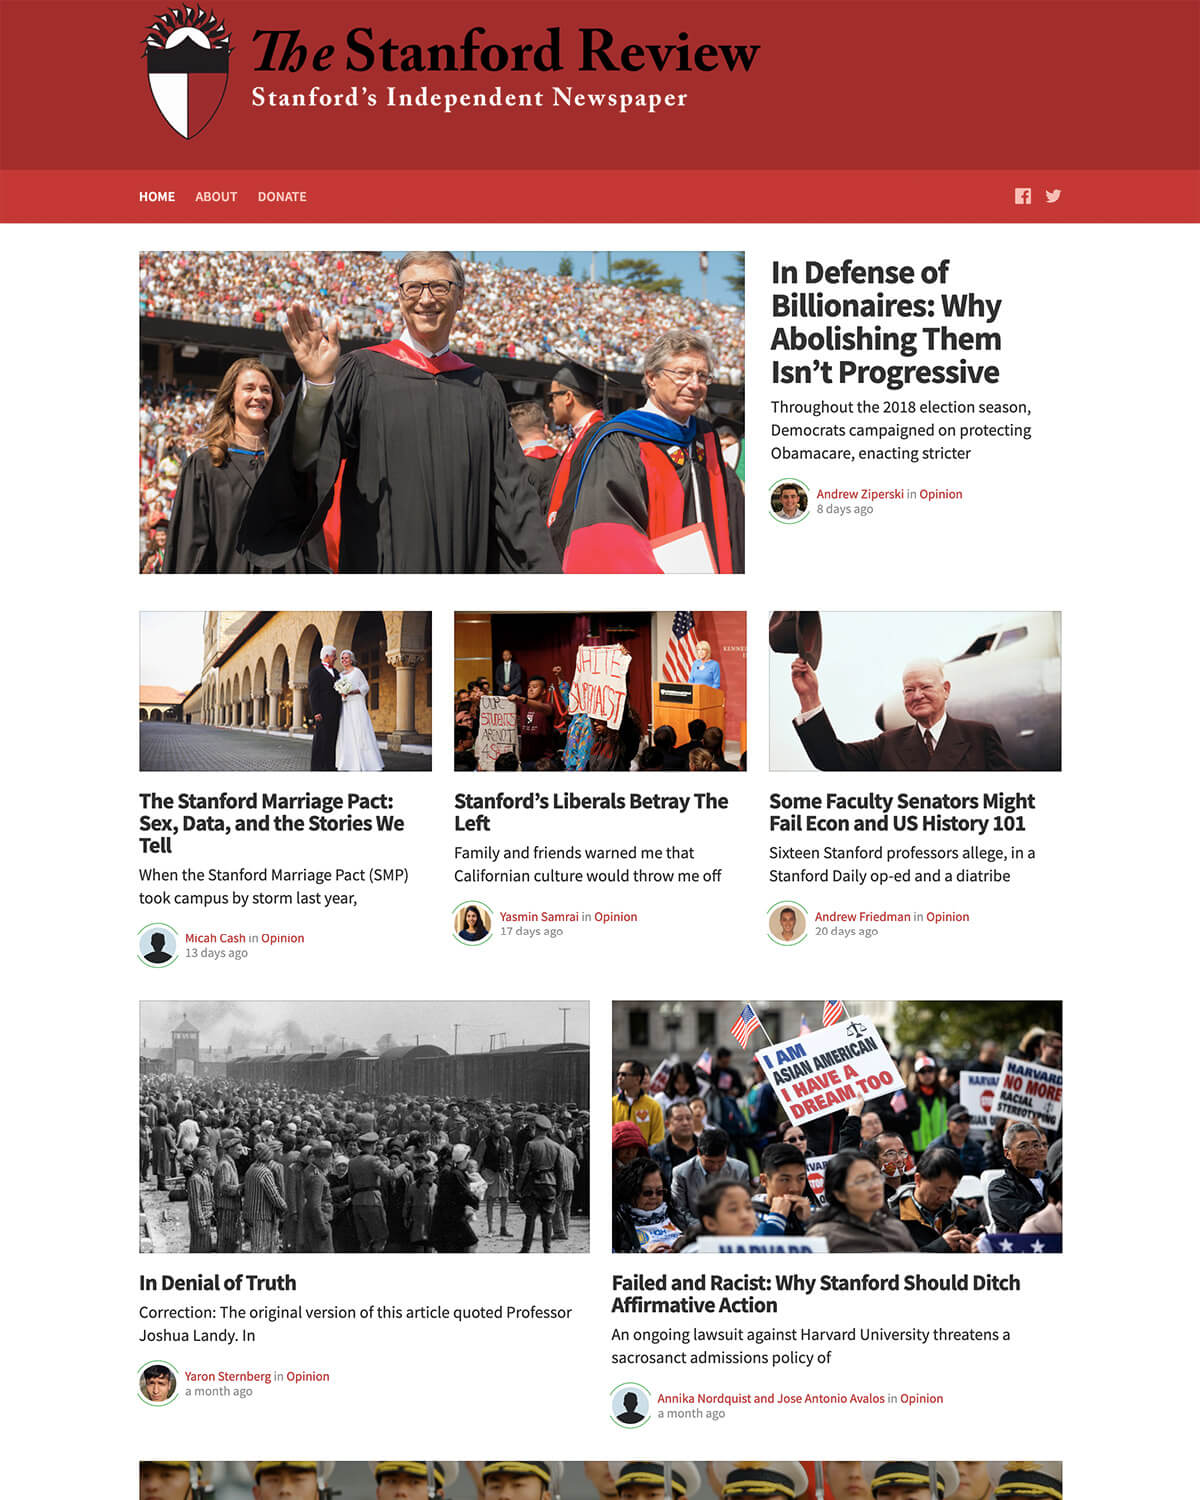 The Stanford Review theme